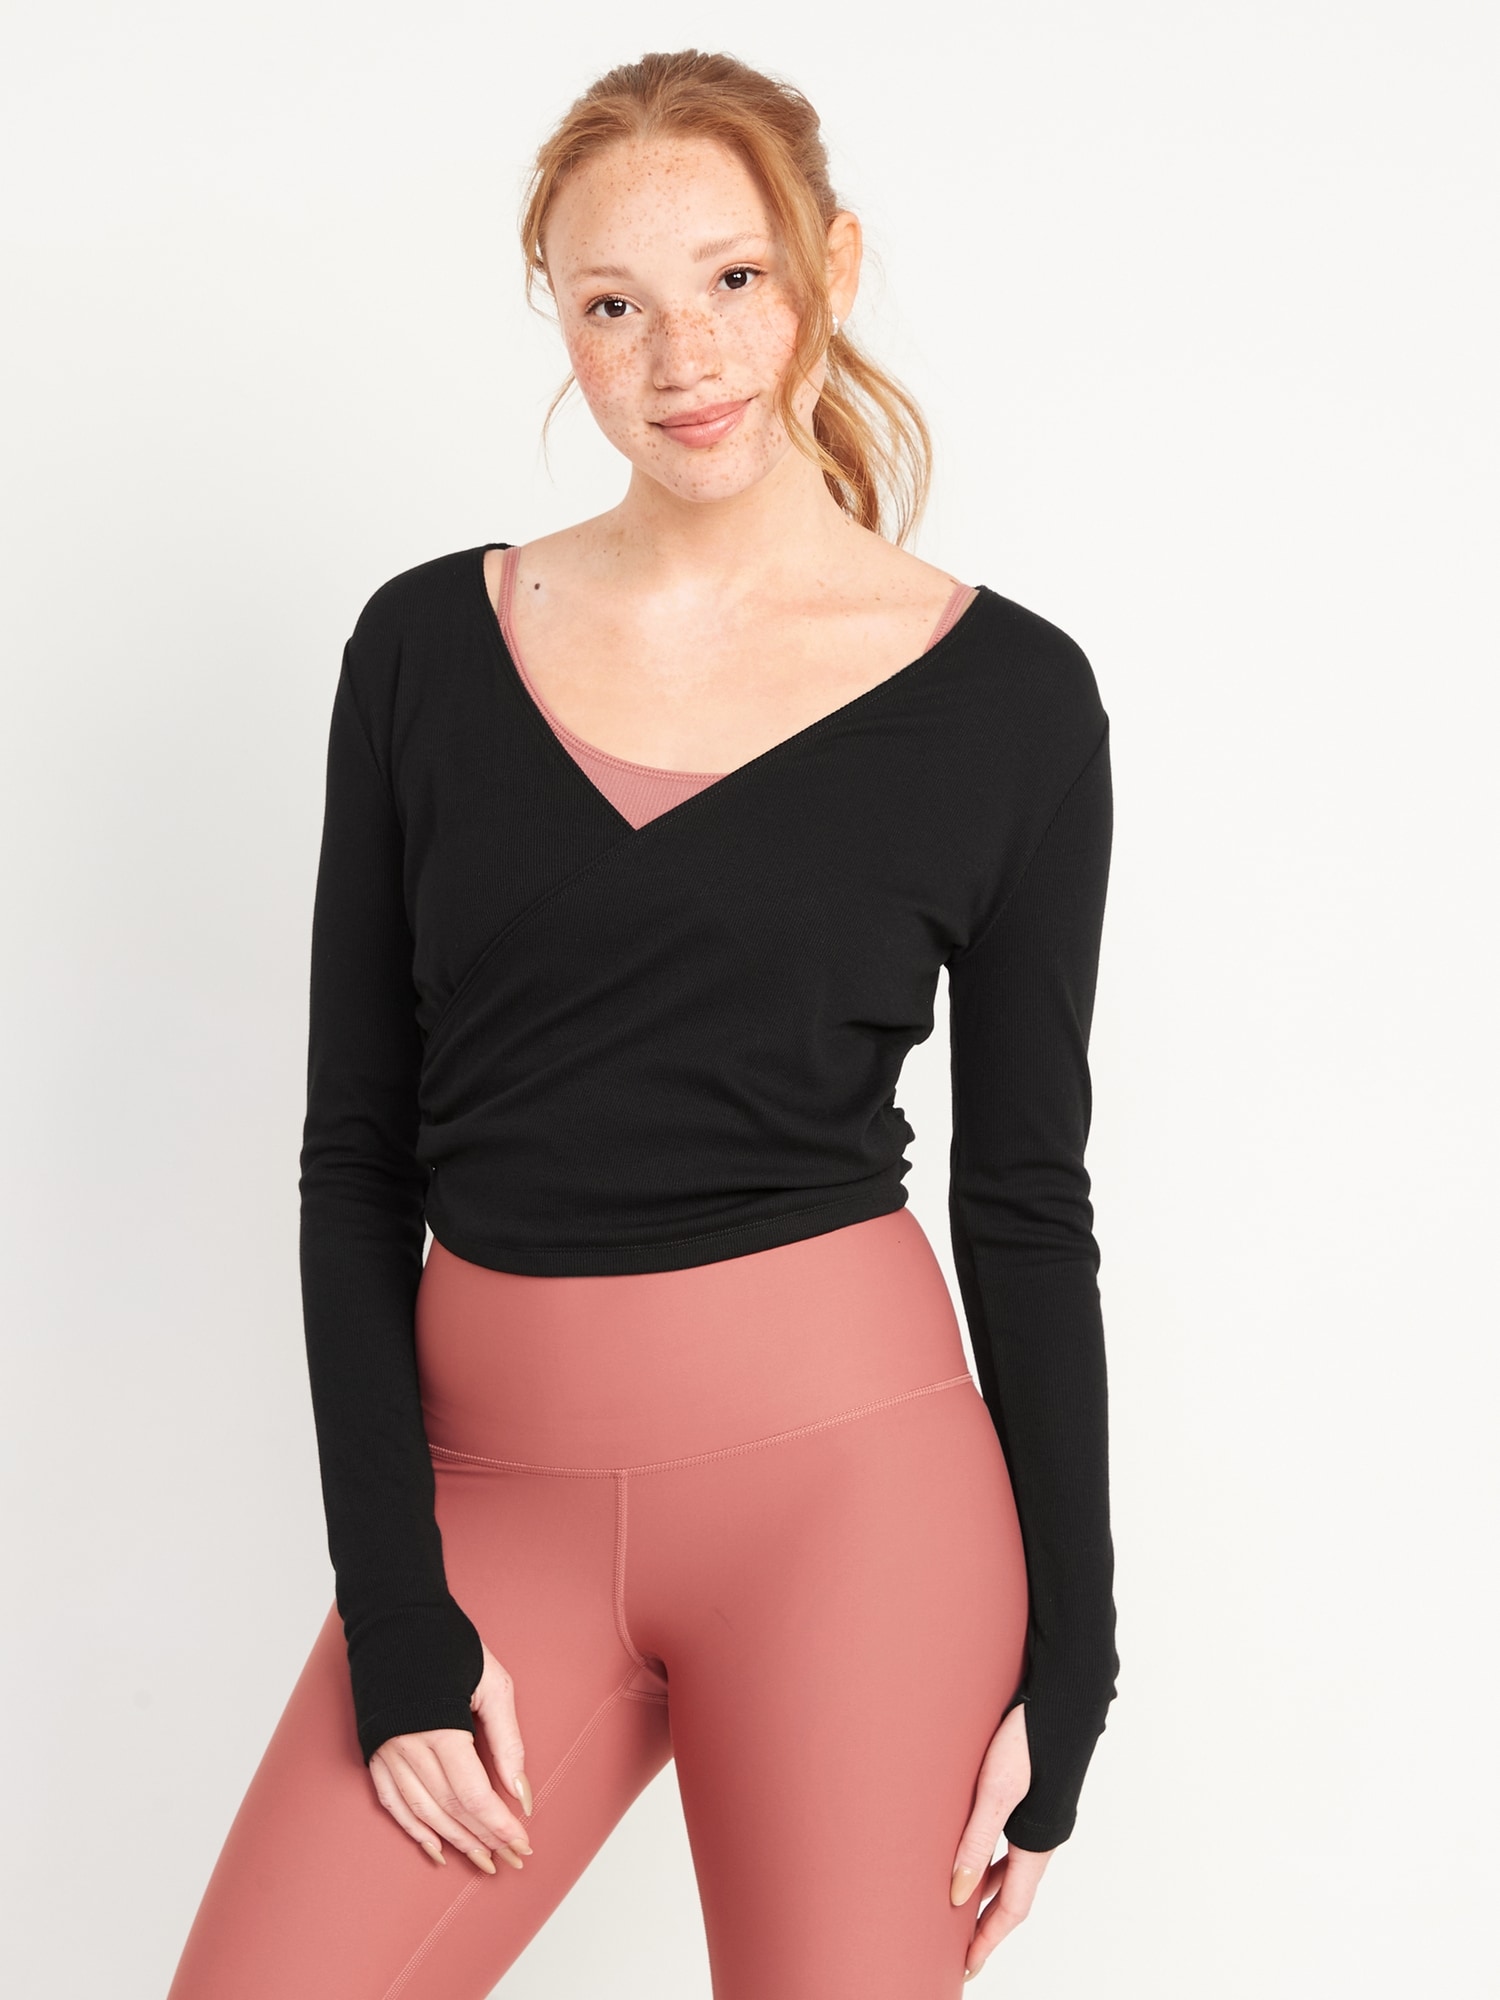 Old Navy Reversible Long-Sleeve UltraLite Cropped Wrap-Effect Back Top for Women black. 1